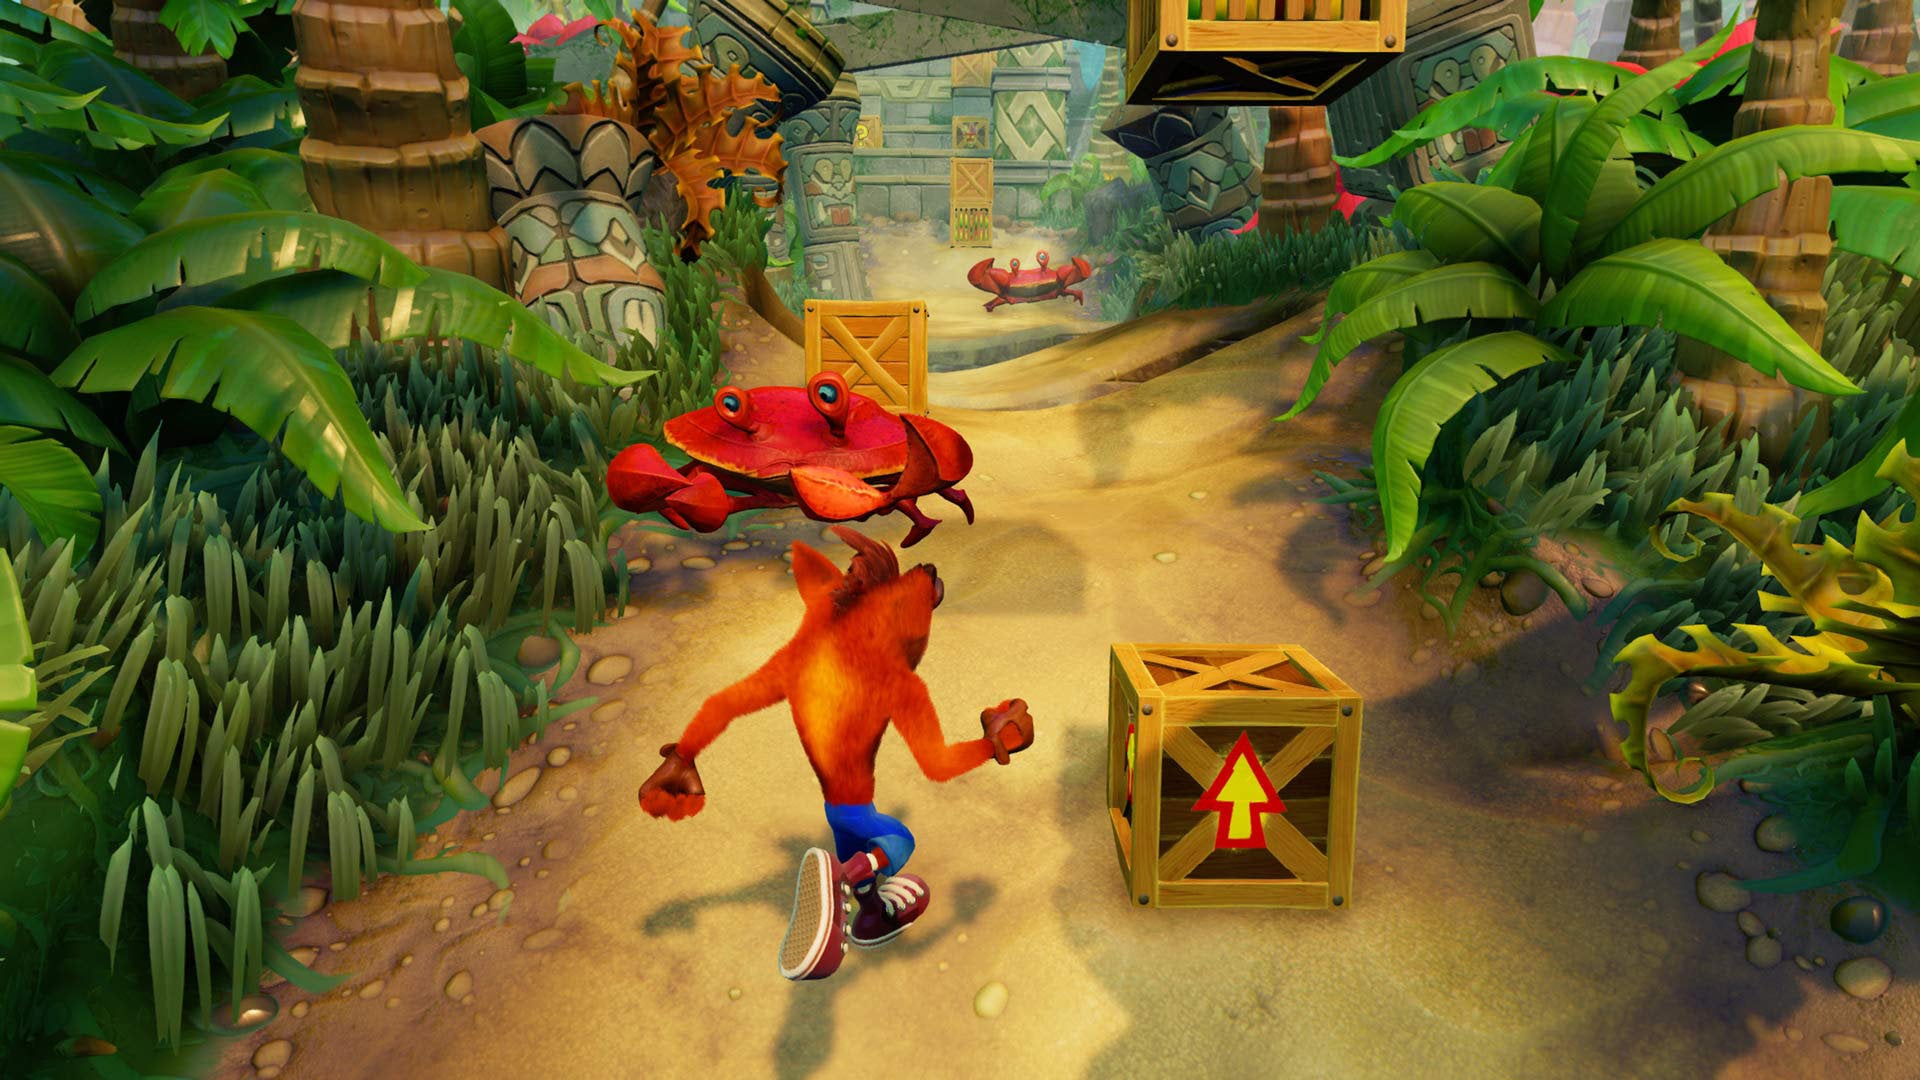 Crash Bandicoot Gems - How to get all White Gems, Green Gems, Blue Gem Locations in N.Sane Trilogy PS4, Xbox One, Switch, PC | VG247